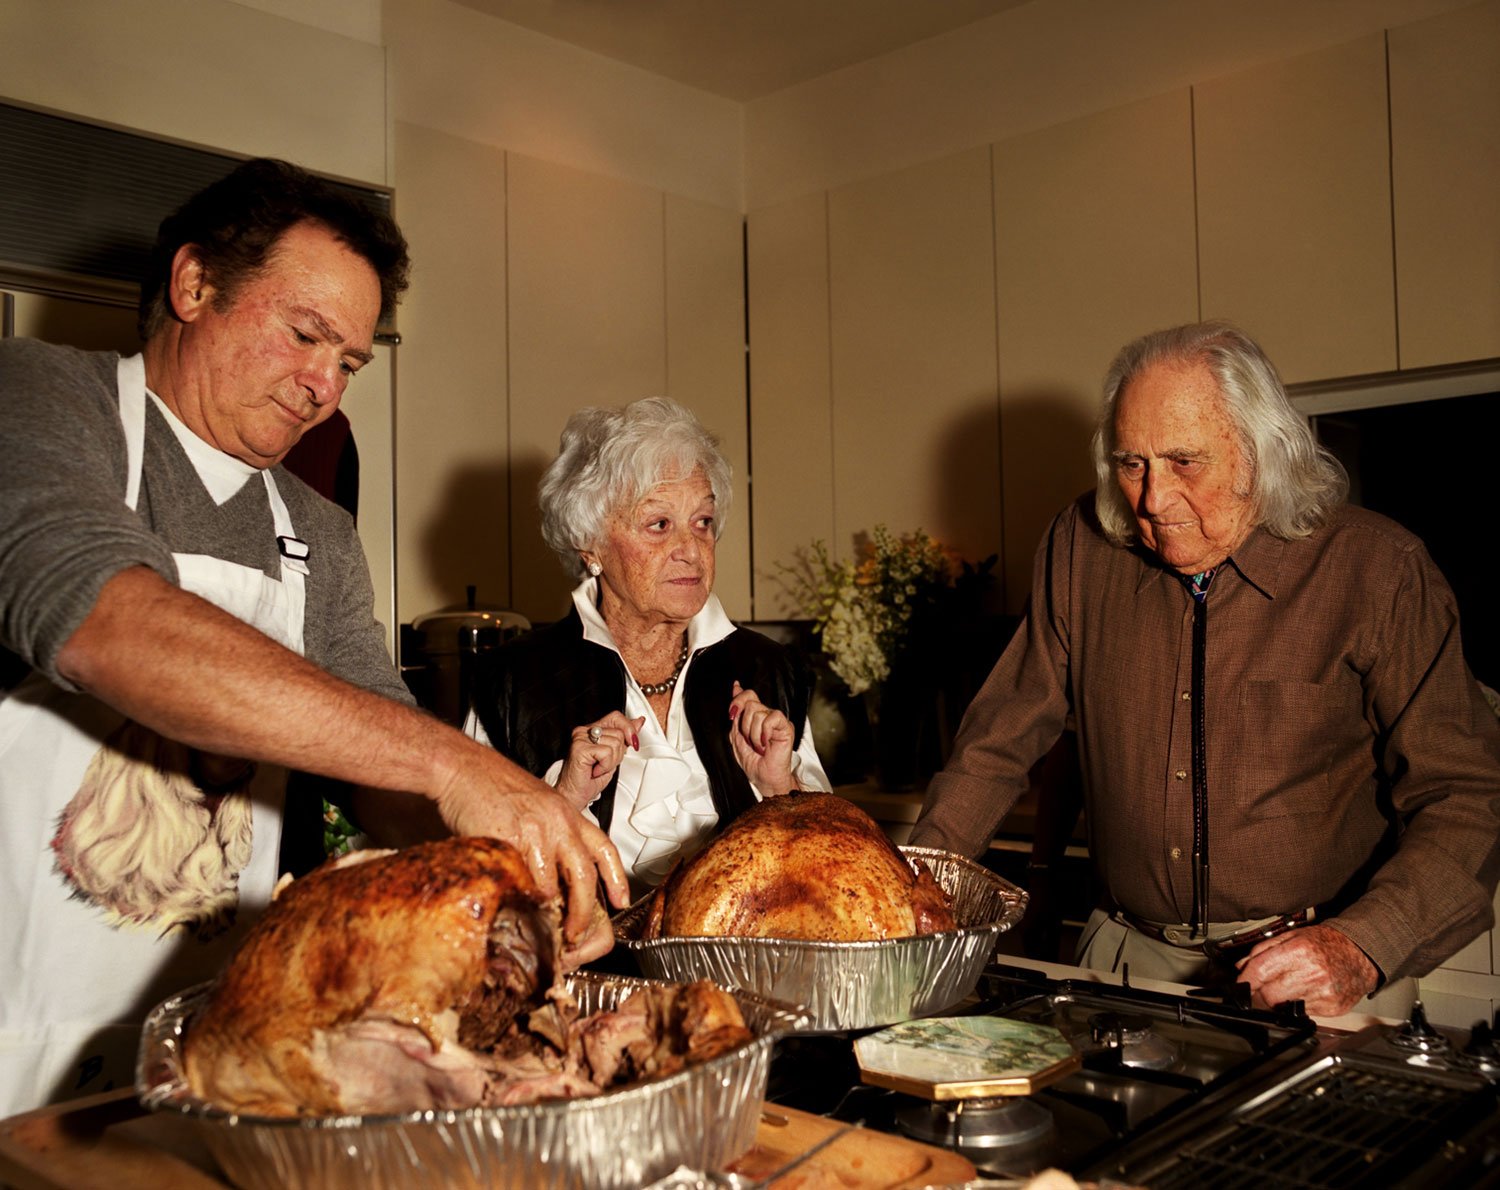 Dad carving the turkey, 2004